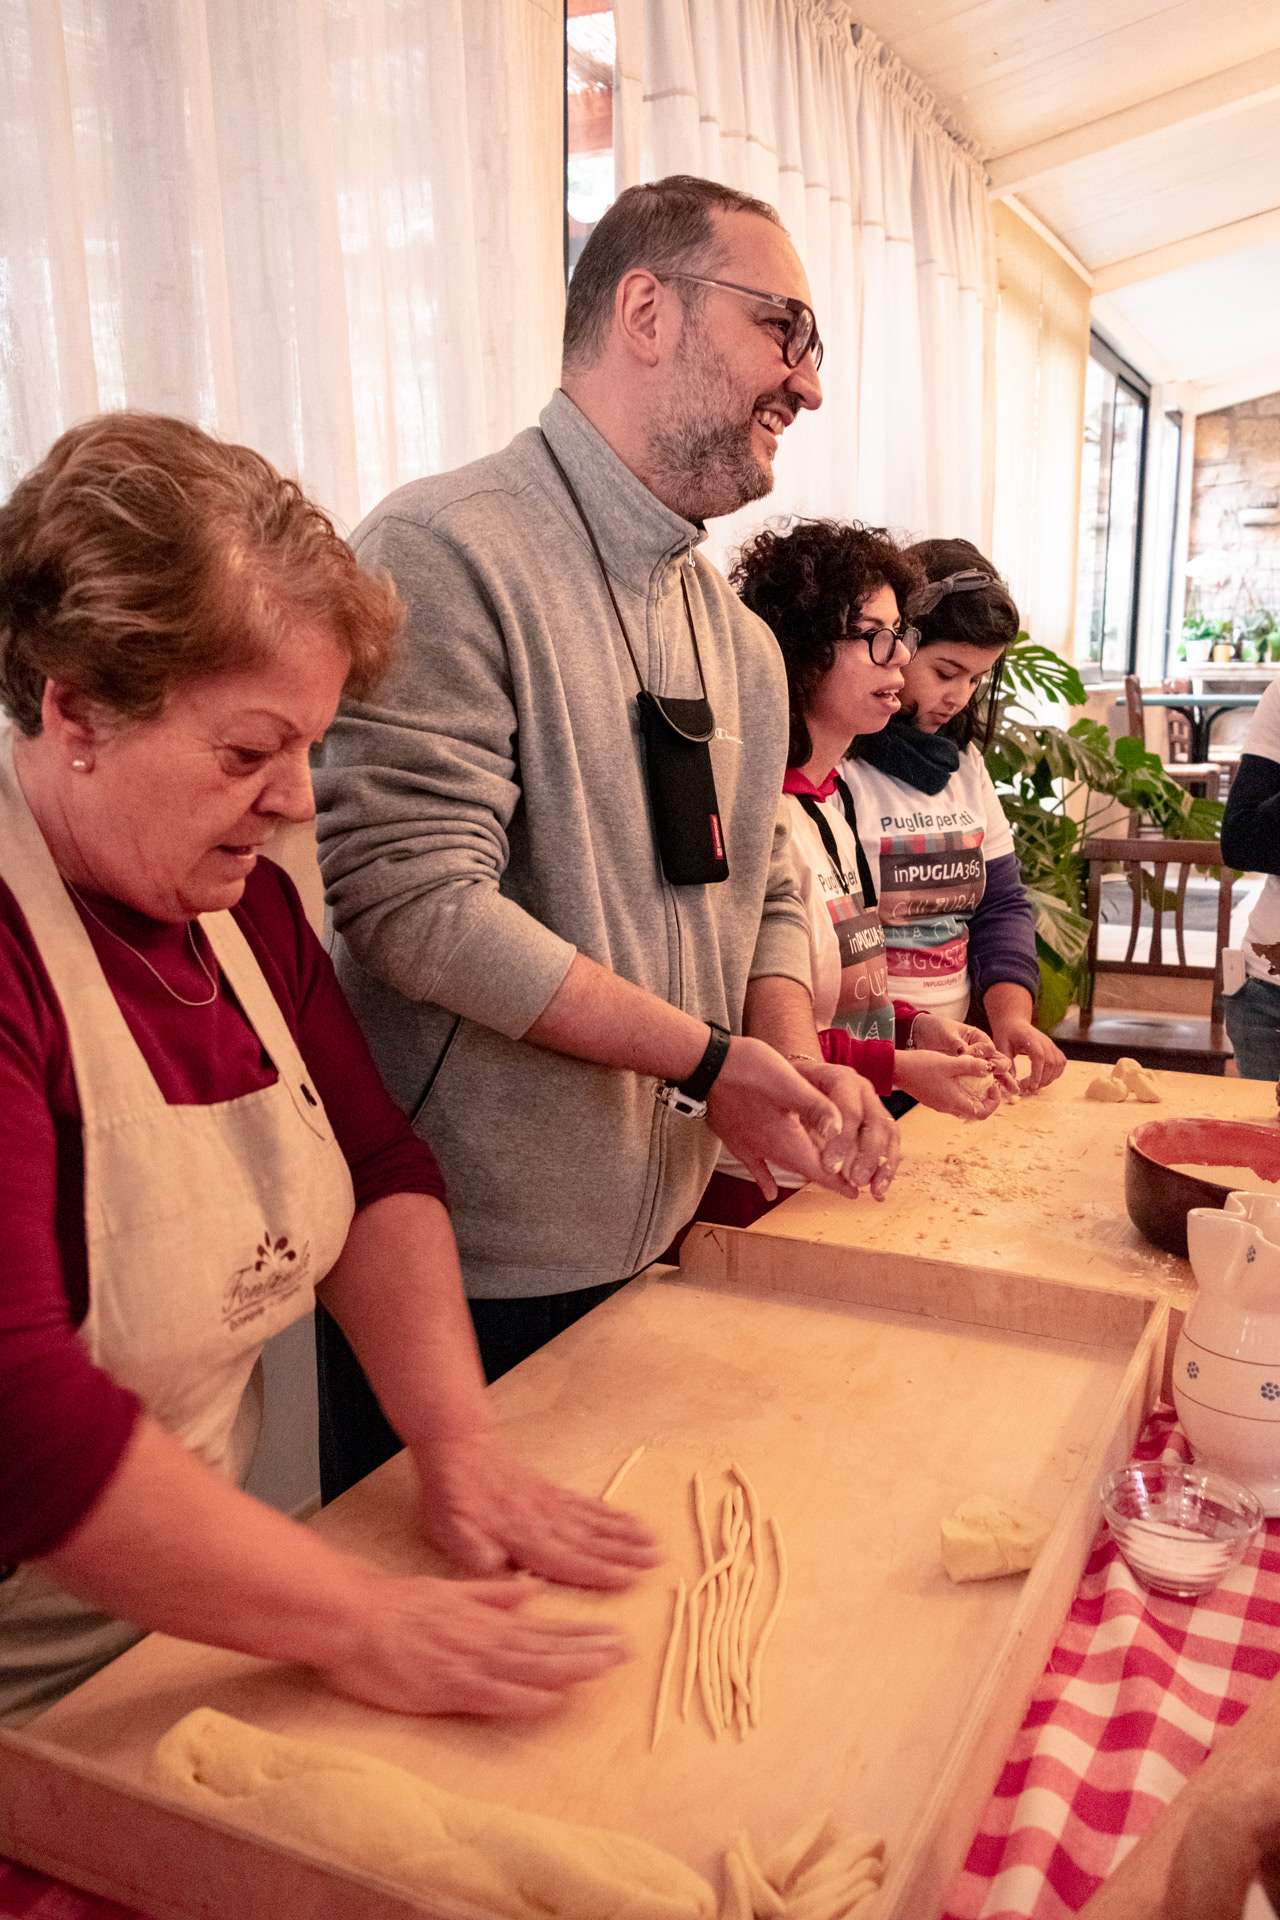 Disabled friendly food experience and cooking class with Puglia senza ostacoli.